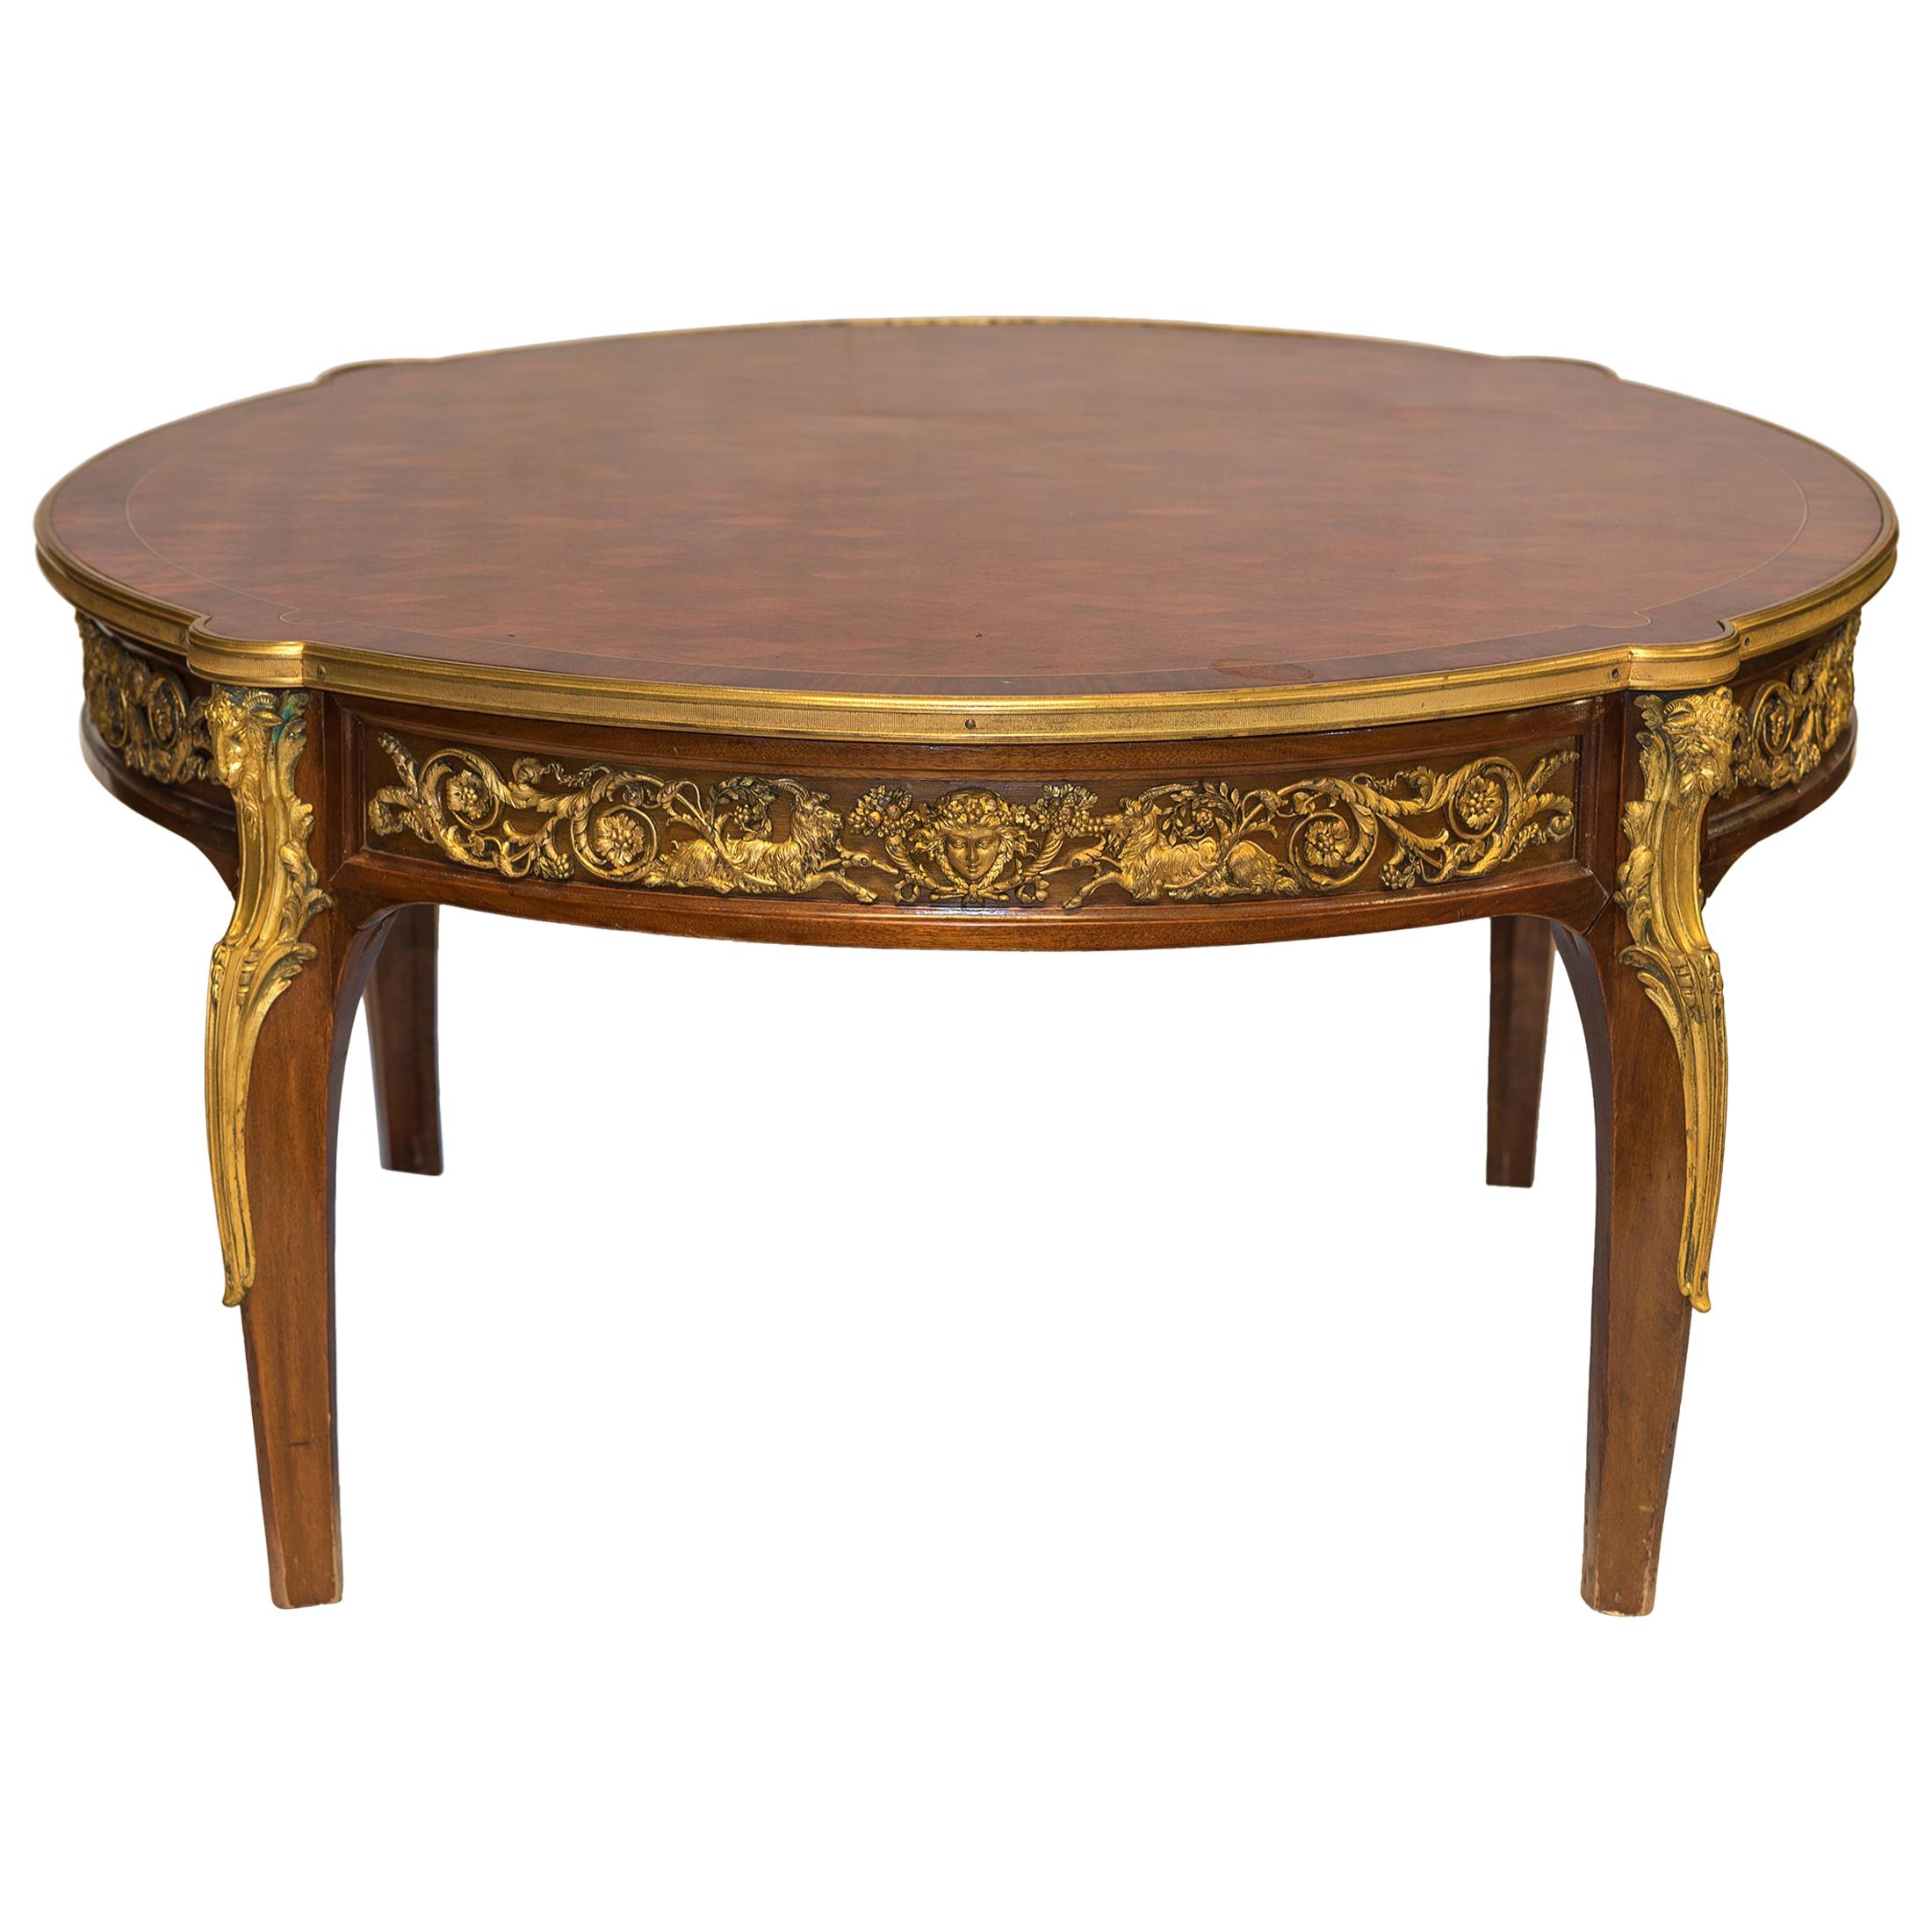 Louis XVI Style Ormolu-Mounted Cube Parquetry Low Round Coffee Table